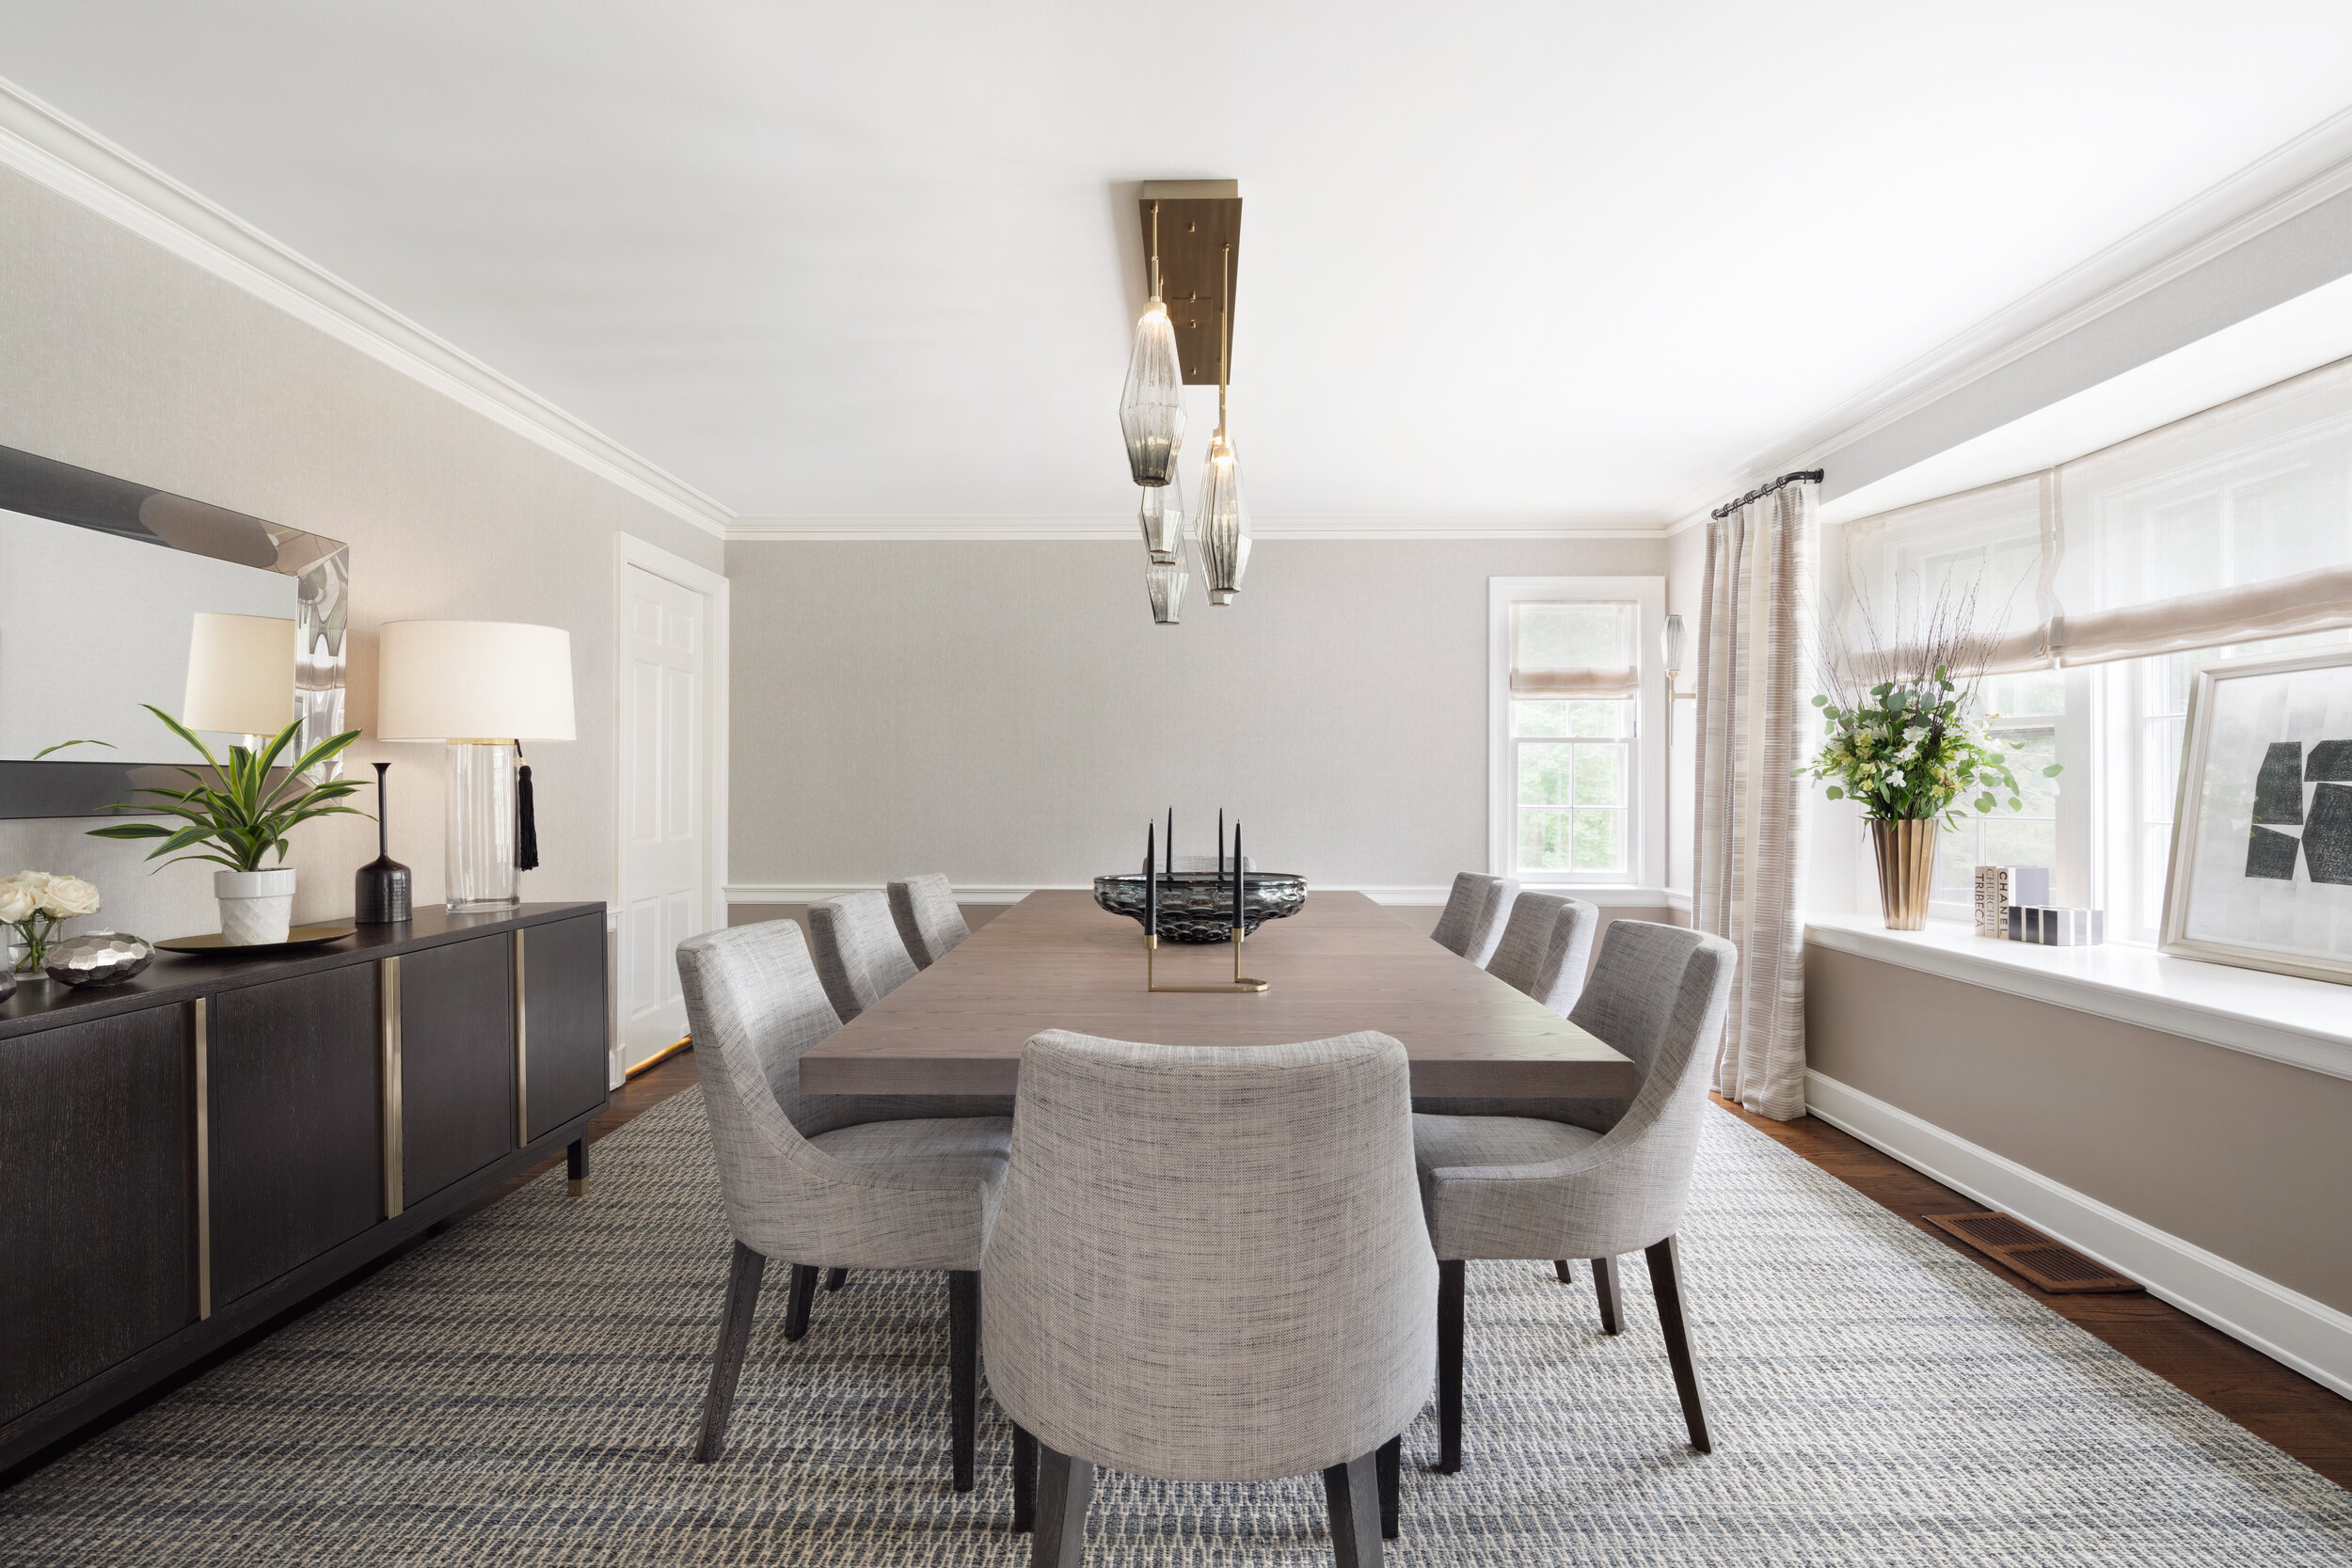 KAM DESIGN_Larchmont NY_Dining Room_Wide_6971_2019.jpg